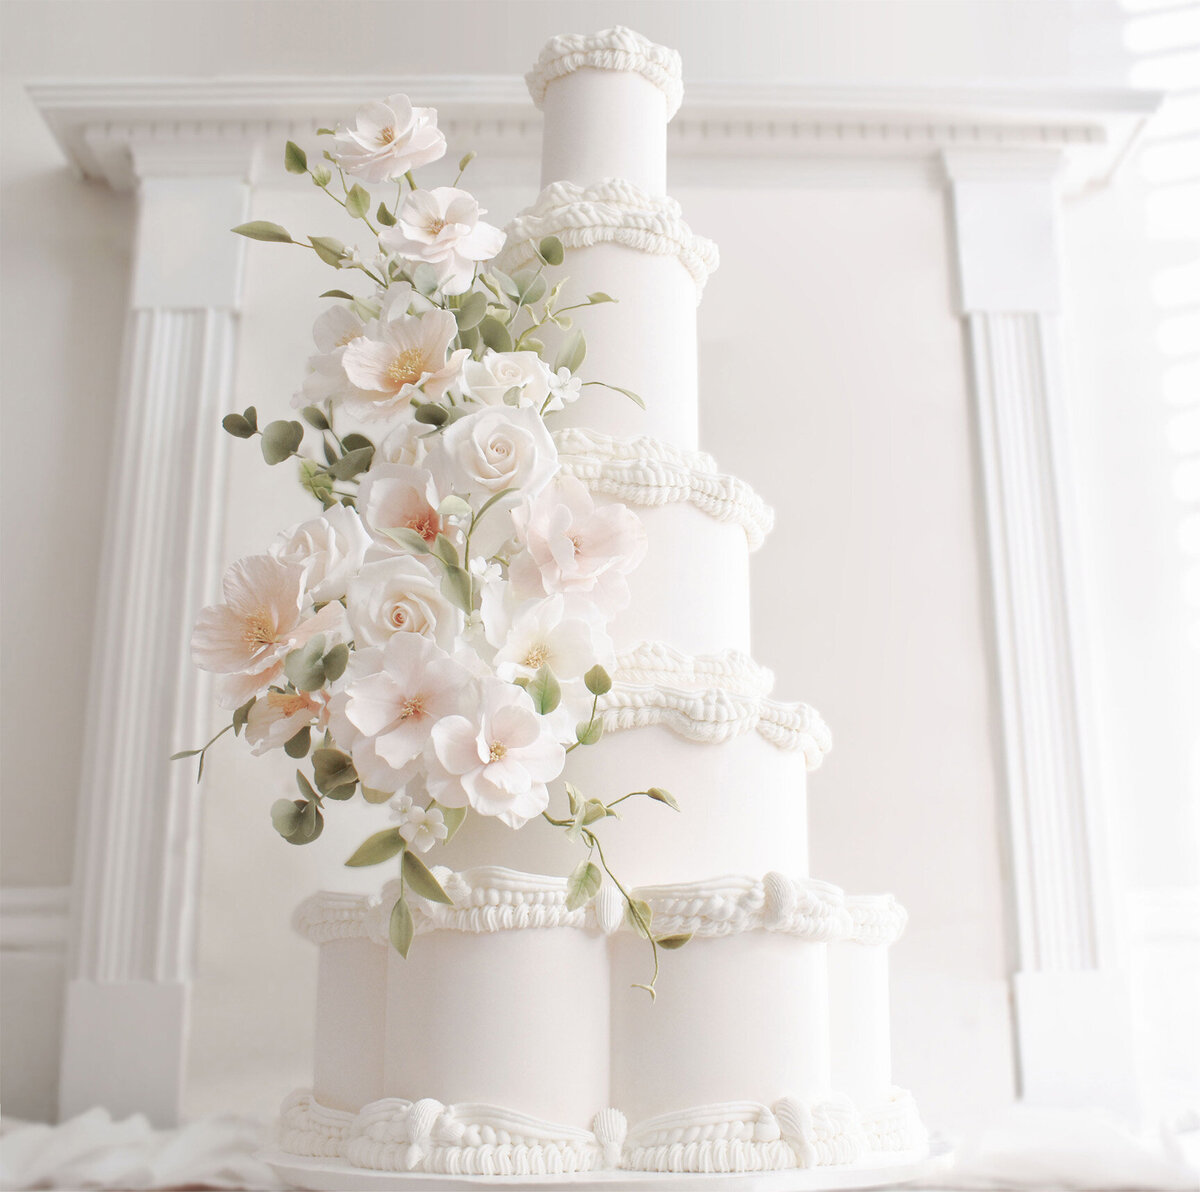 Grand white wedding cake with elegant hand piping and sugar flower cascade